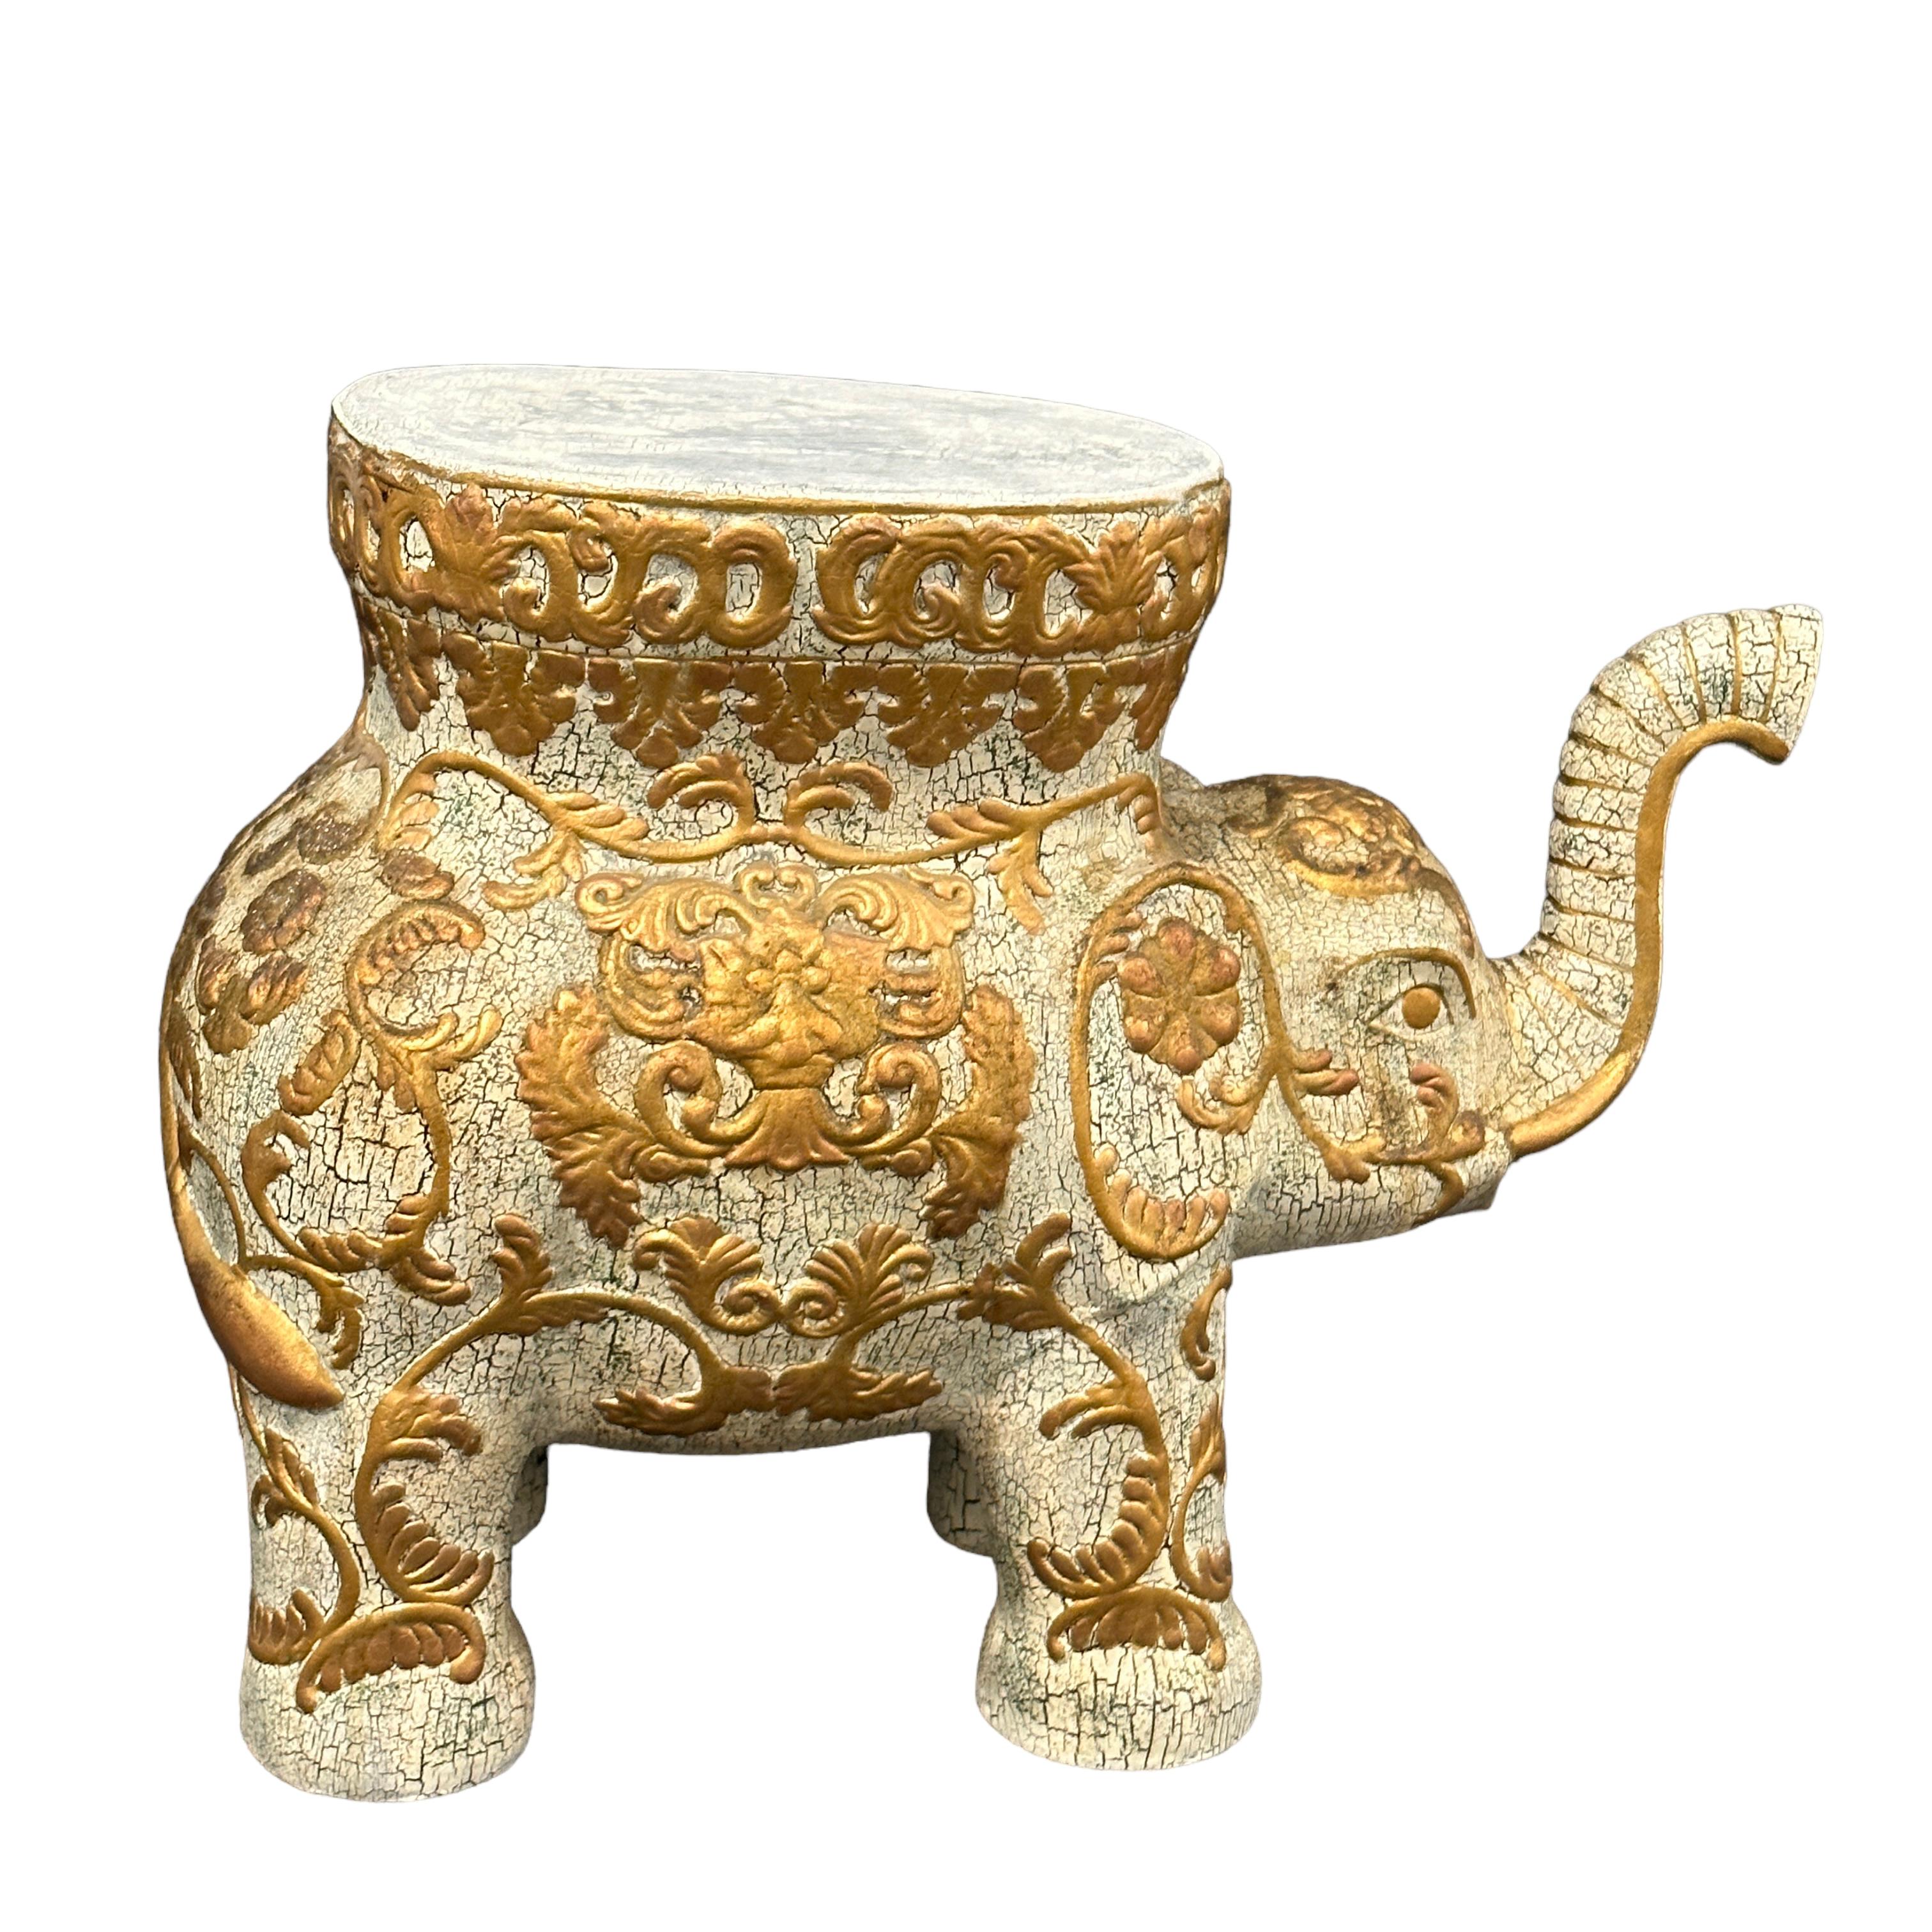 Mid-20th century ceramic elephant garden stool, flower pot seat or side table. Handmade of ceramic. Nice addition to your home, patio or garden. Also nice in your pool area to hold your personal belongings or as a drinks stand.
 